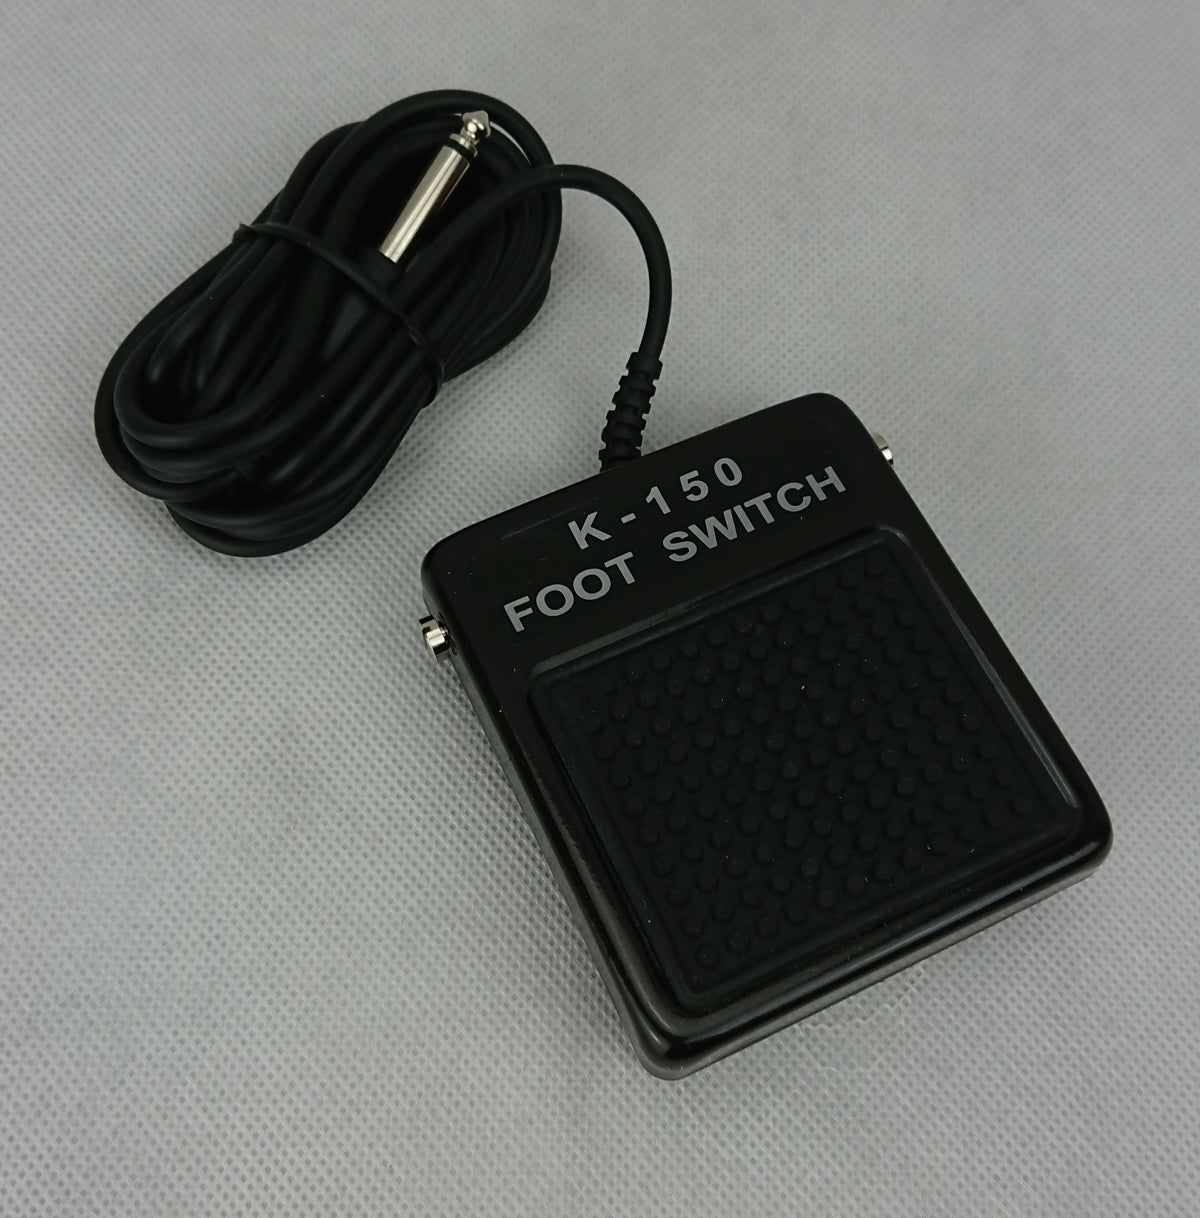 Footswitch K-150